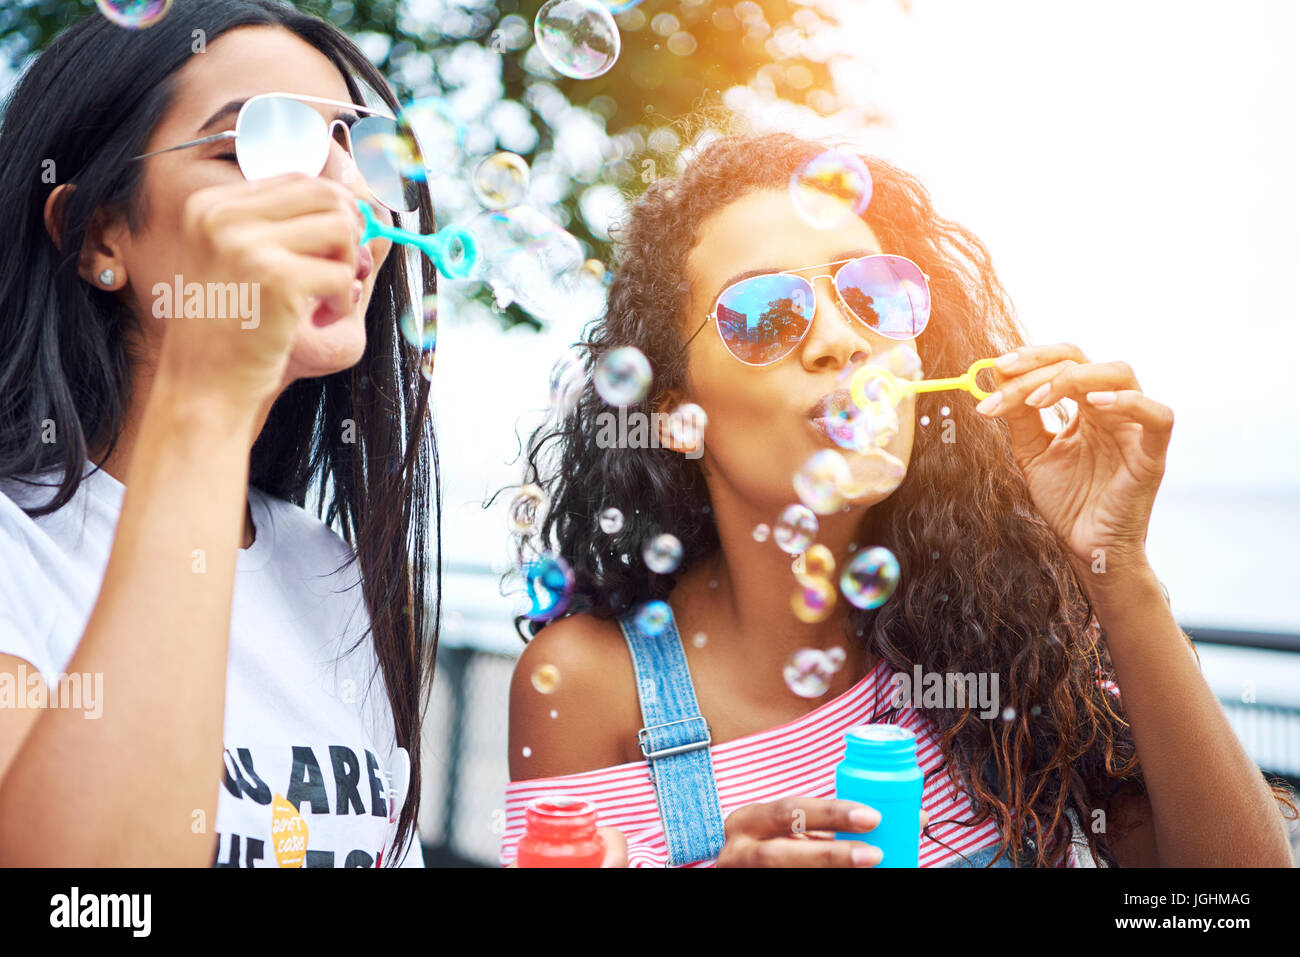 Two carefree young girlfriends having fun together blowing bubbles with a toy bubble wand while enjoying a sunny day together outside Stock Photo